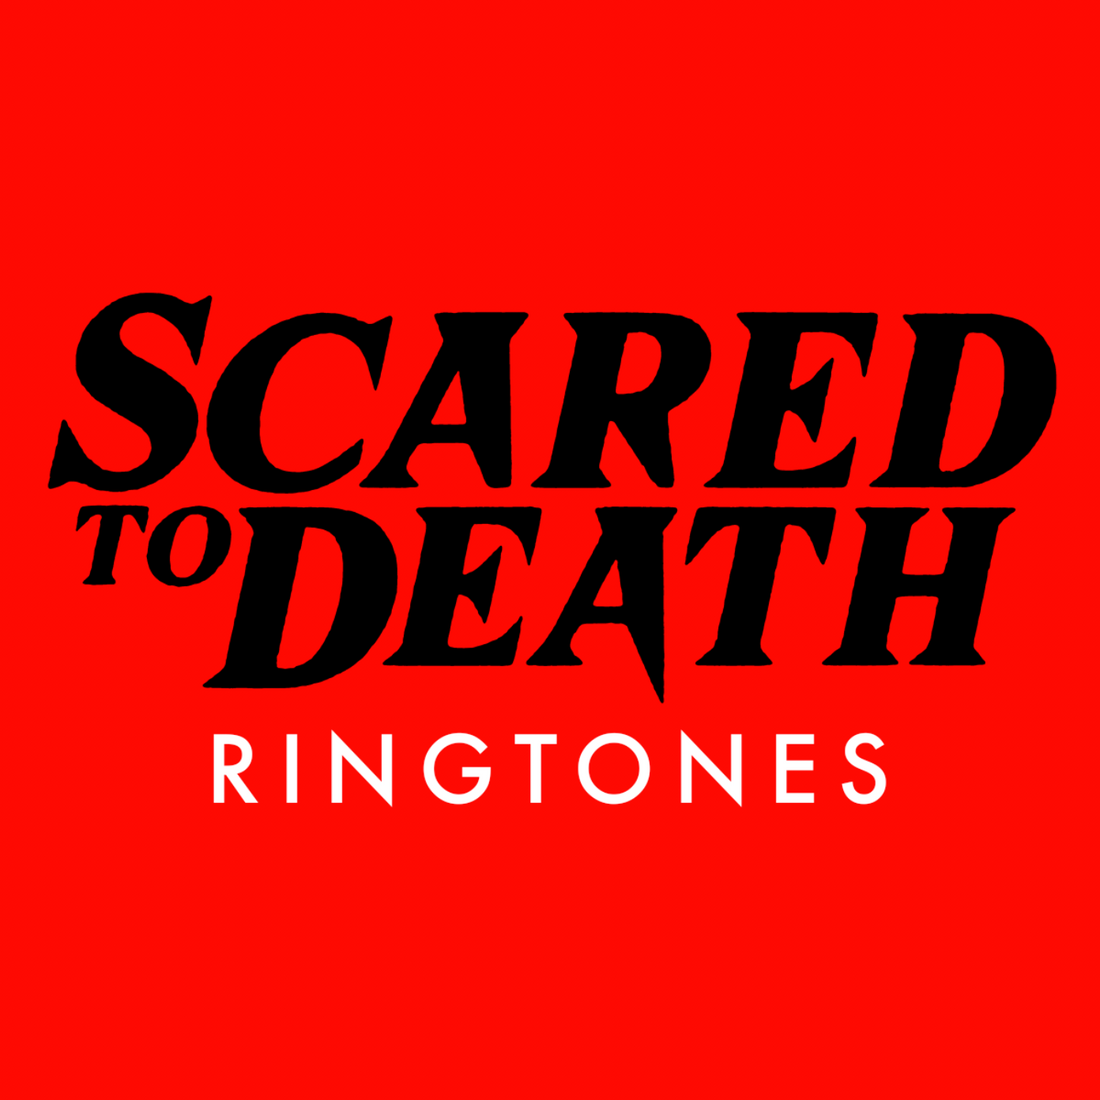 STD SCARE Ringtone (for iPhone users)